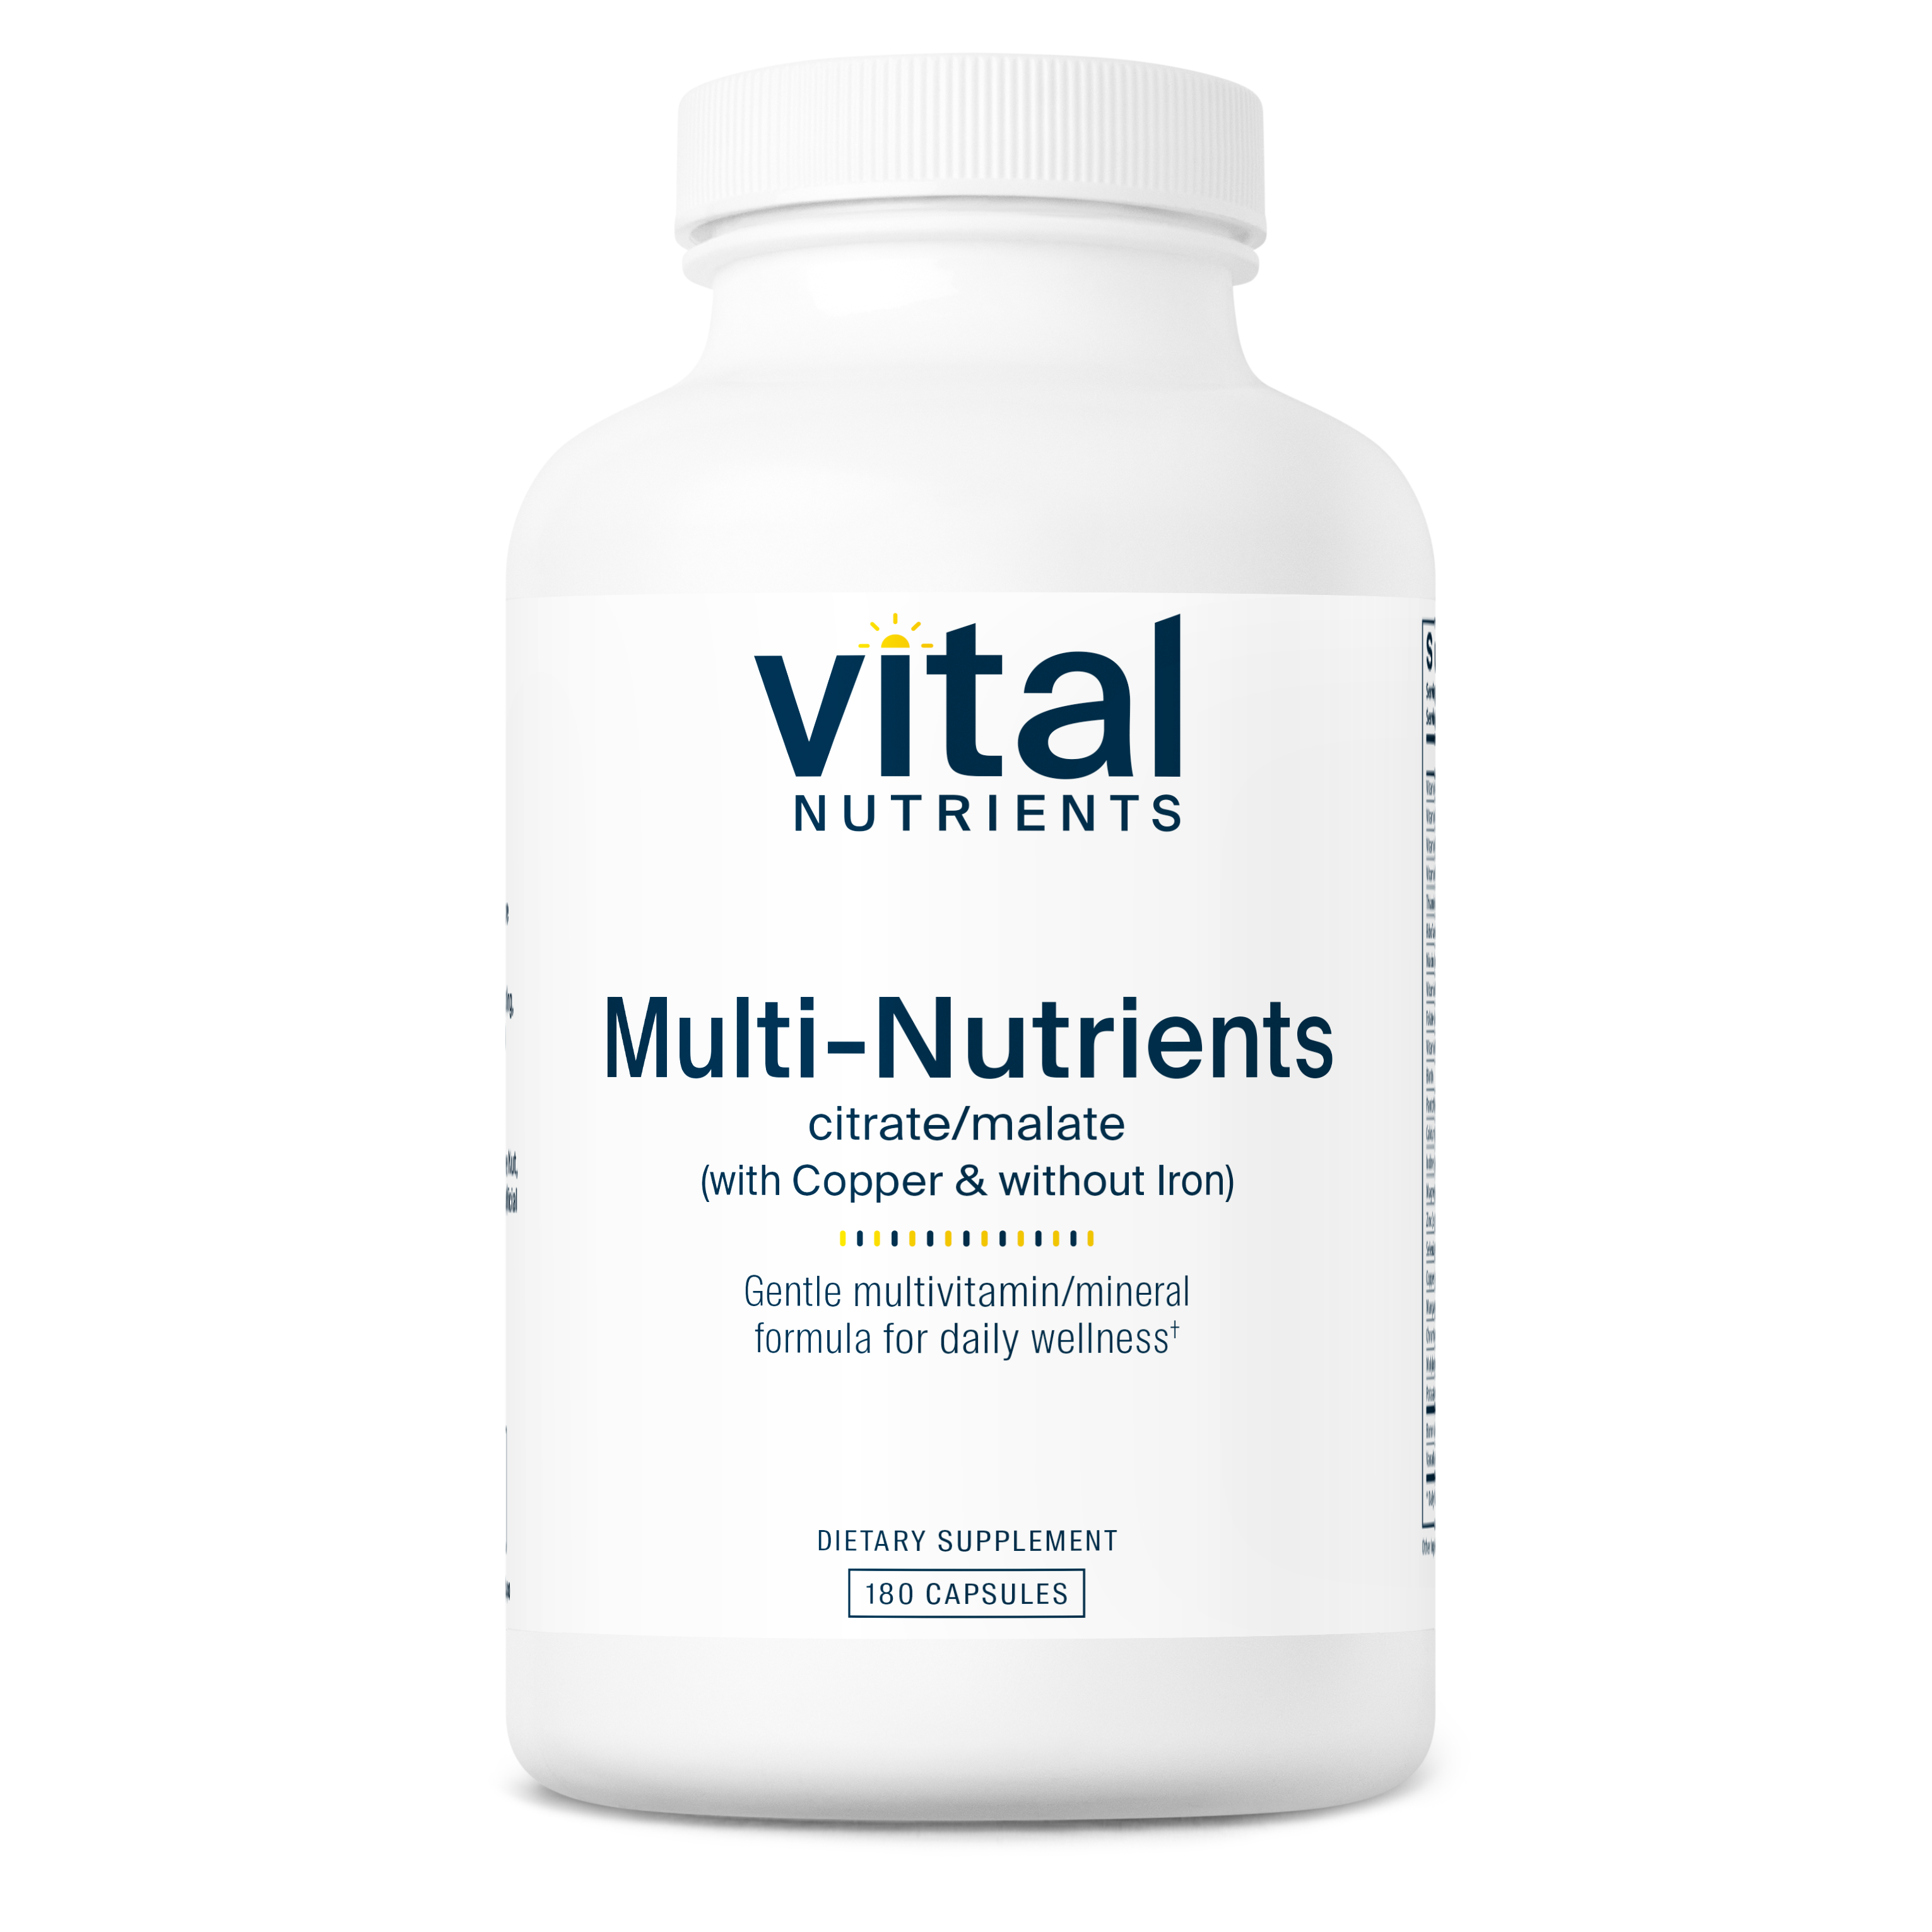 Multi-Nutrients 2 Citrate/Malate Formula (with Copper & without Iron)